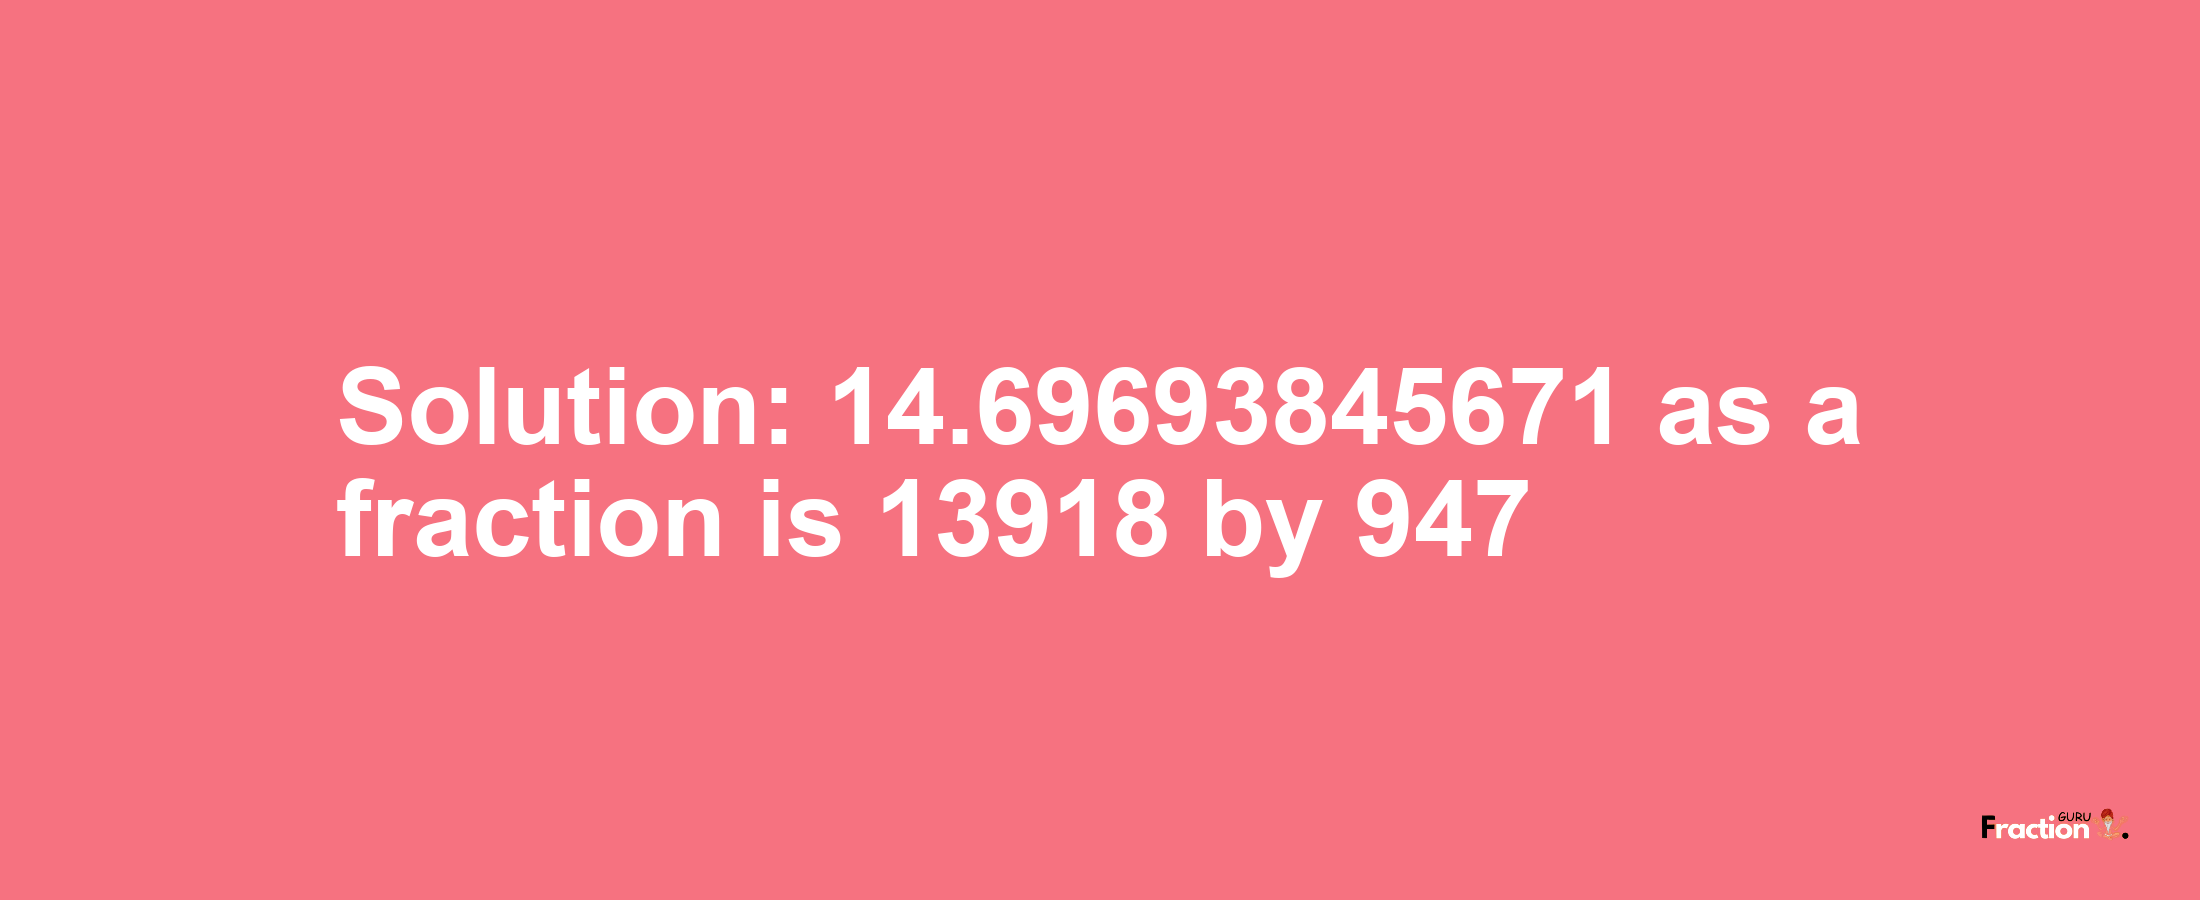 Solution:14.69693845671 as a fraction is 13918/947